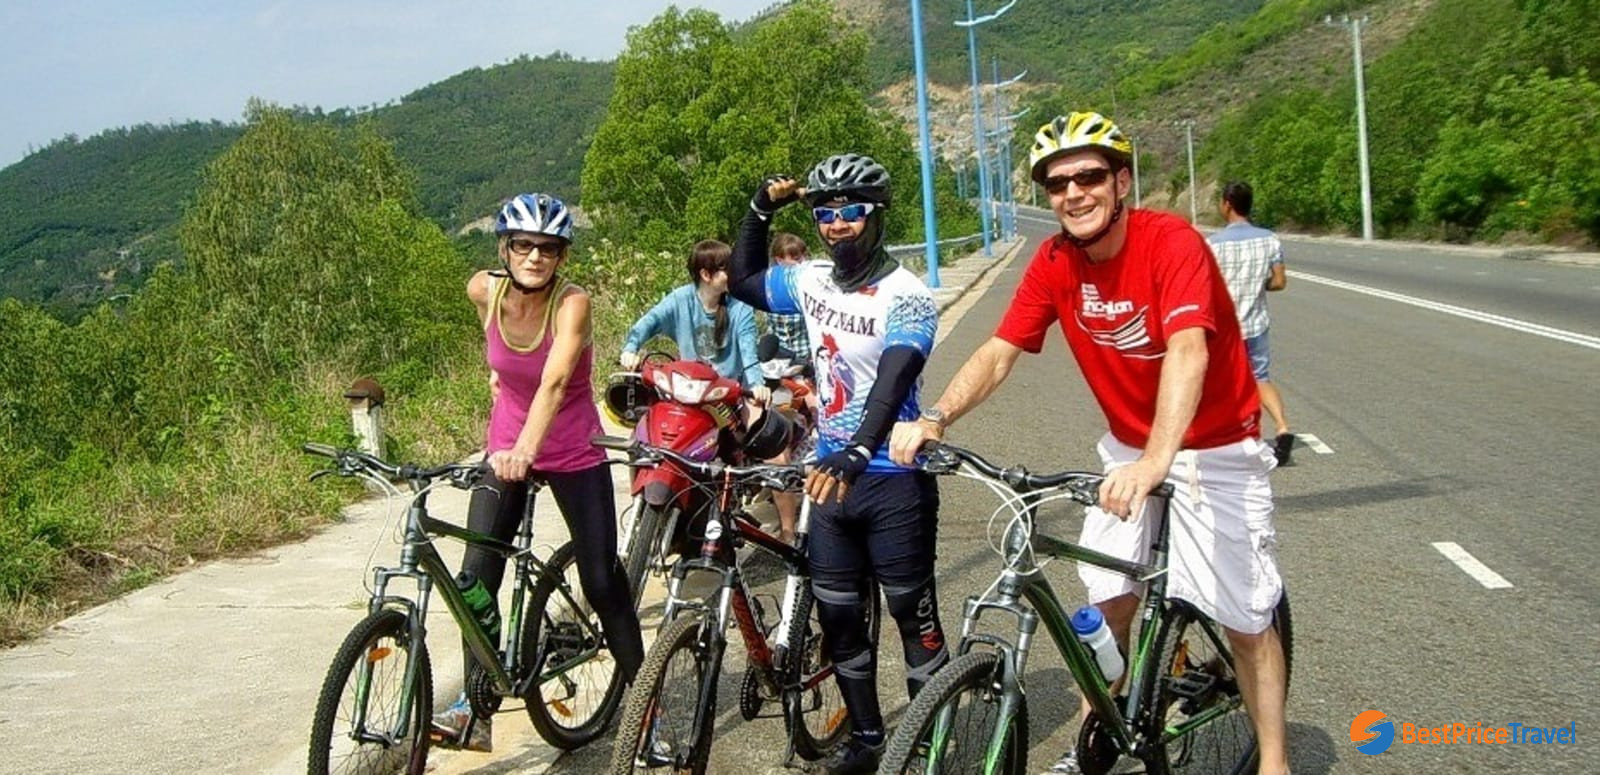 The route from Hue to Hoi An is the longest route out of three cycling routes